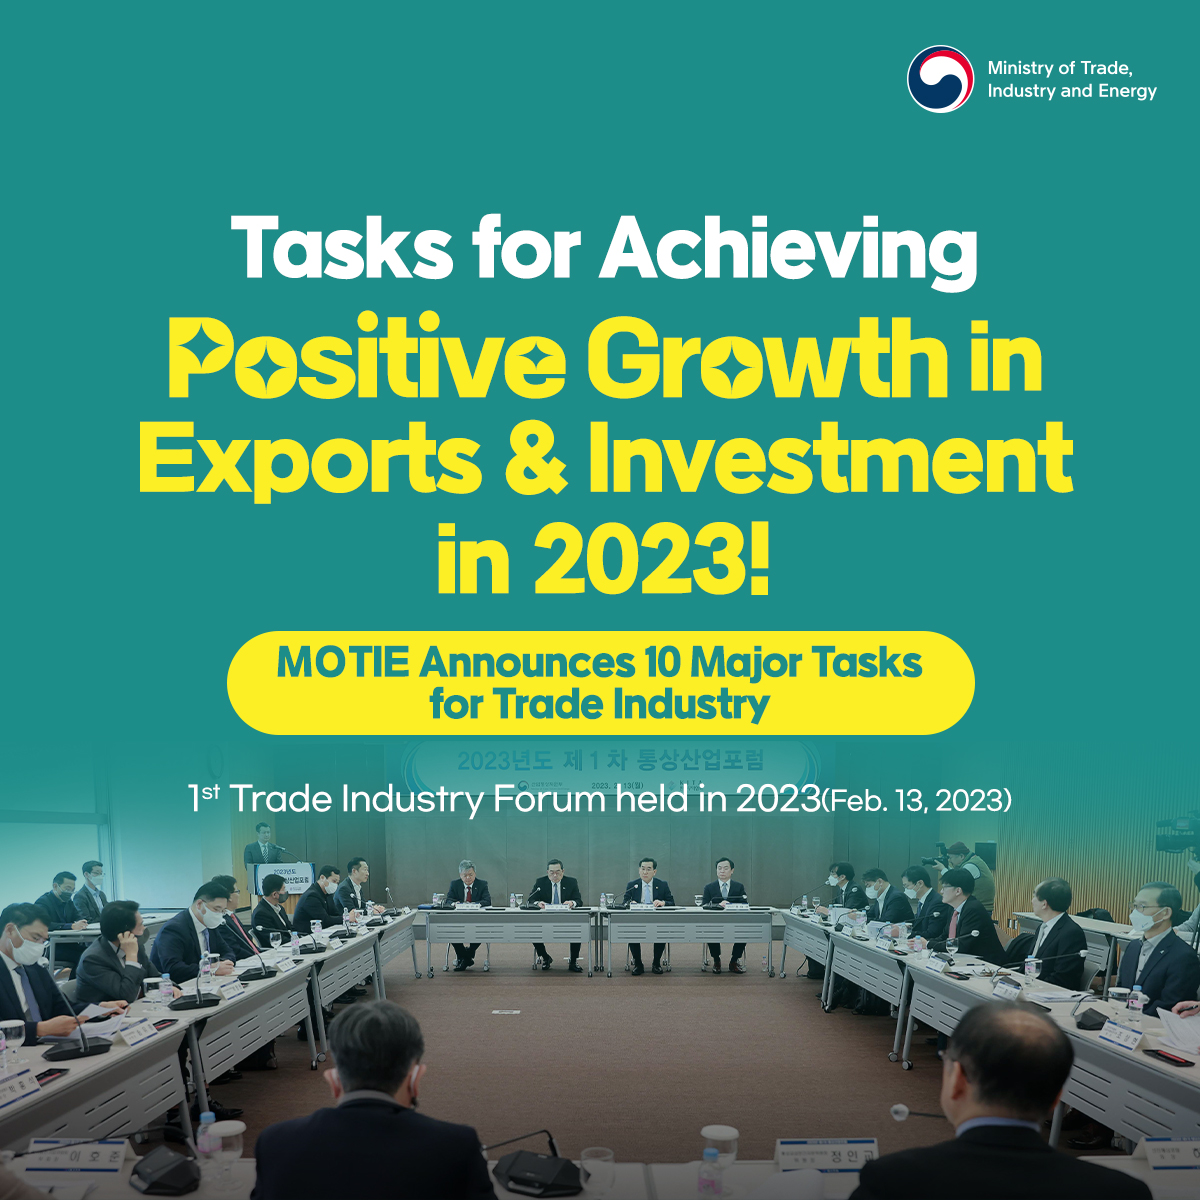 MOTIE announces 10 major tasks for export & investment growth in 2023 Image 0